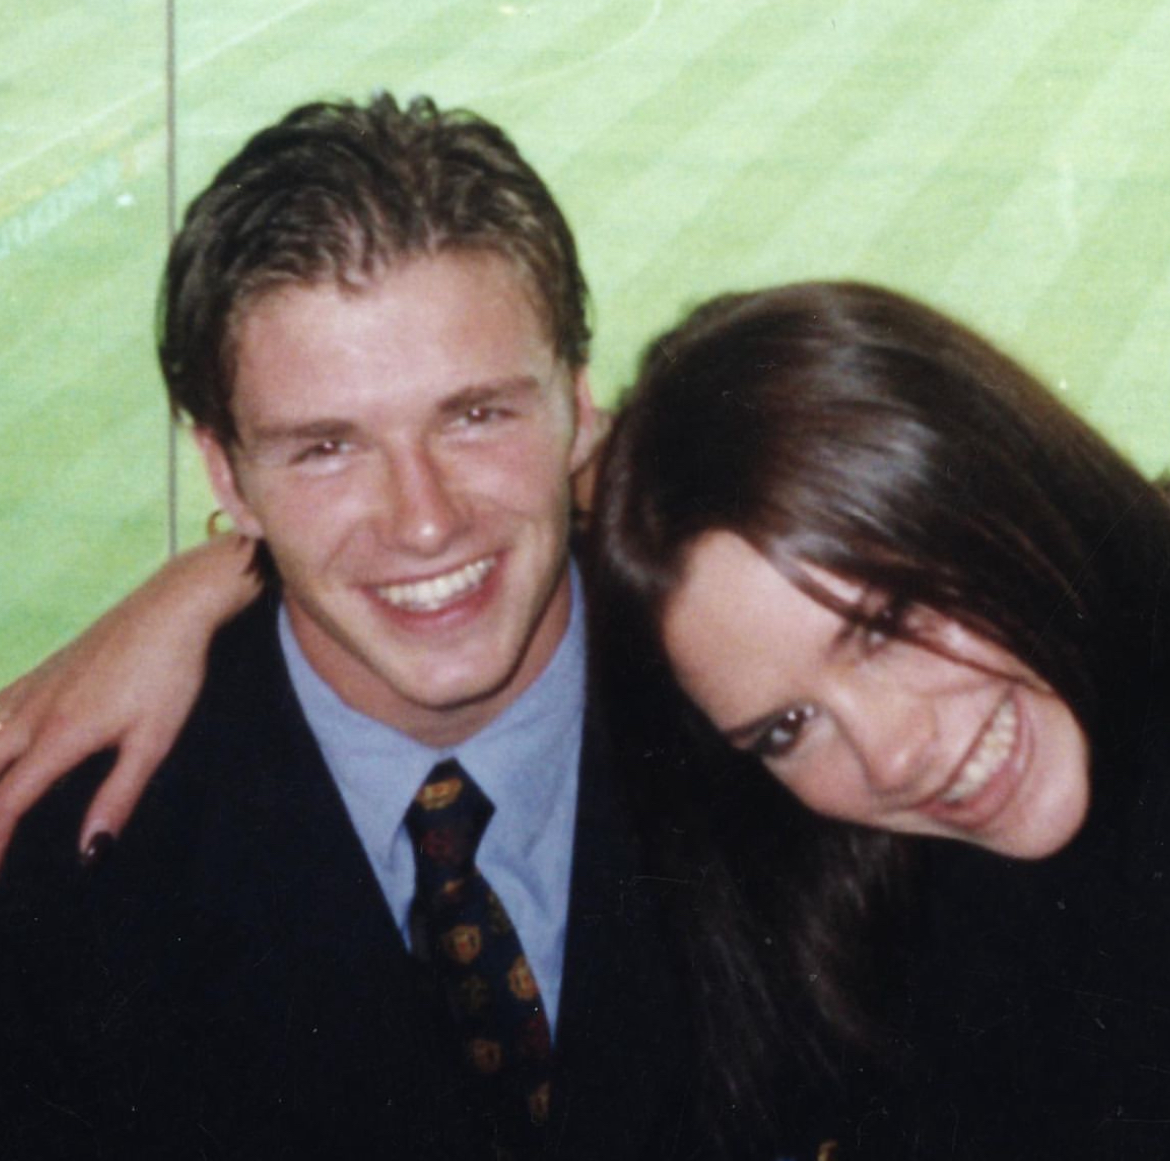 The couple smiling at the camera, this is one of the photos used for their Netflix documentary, "Beckham."